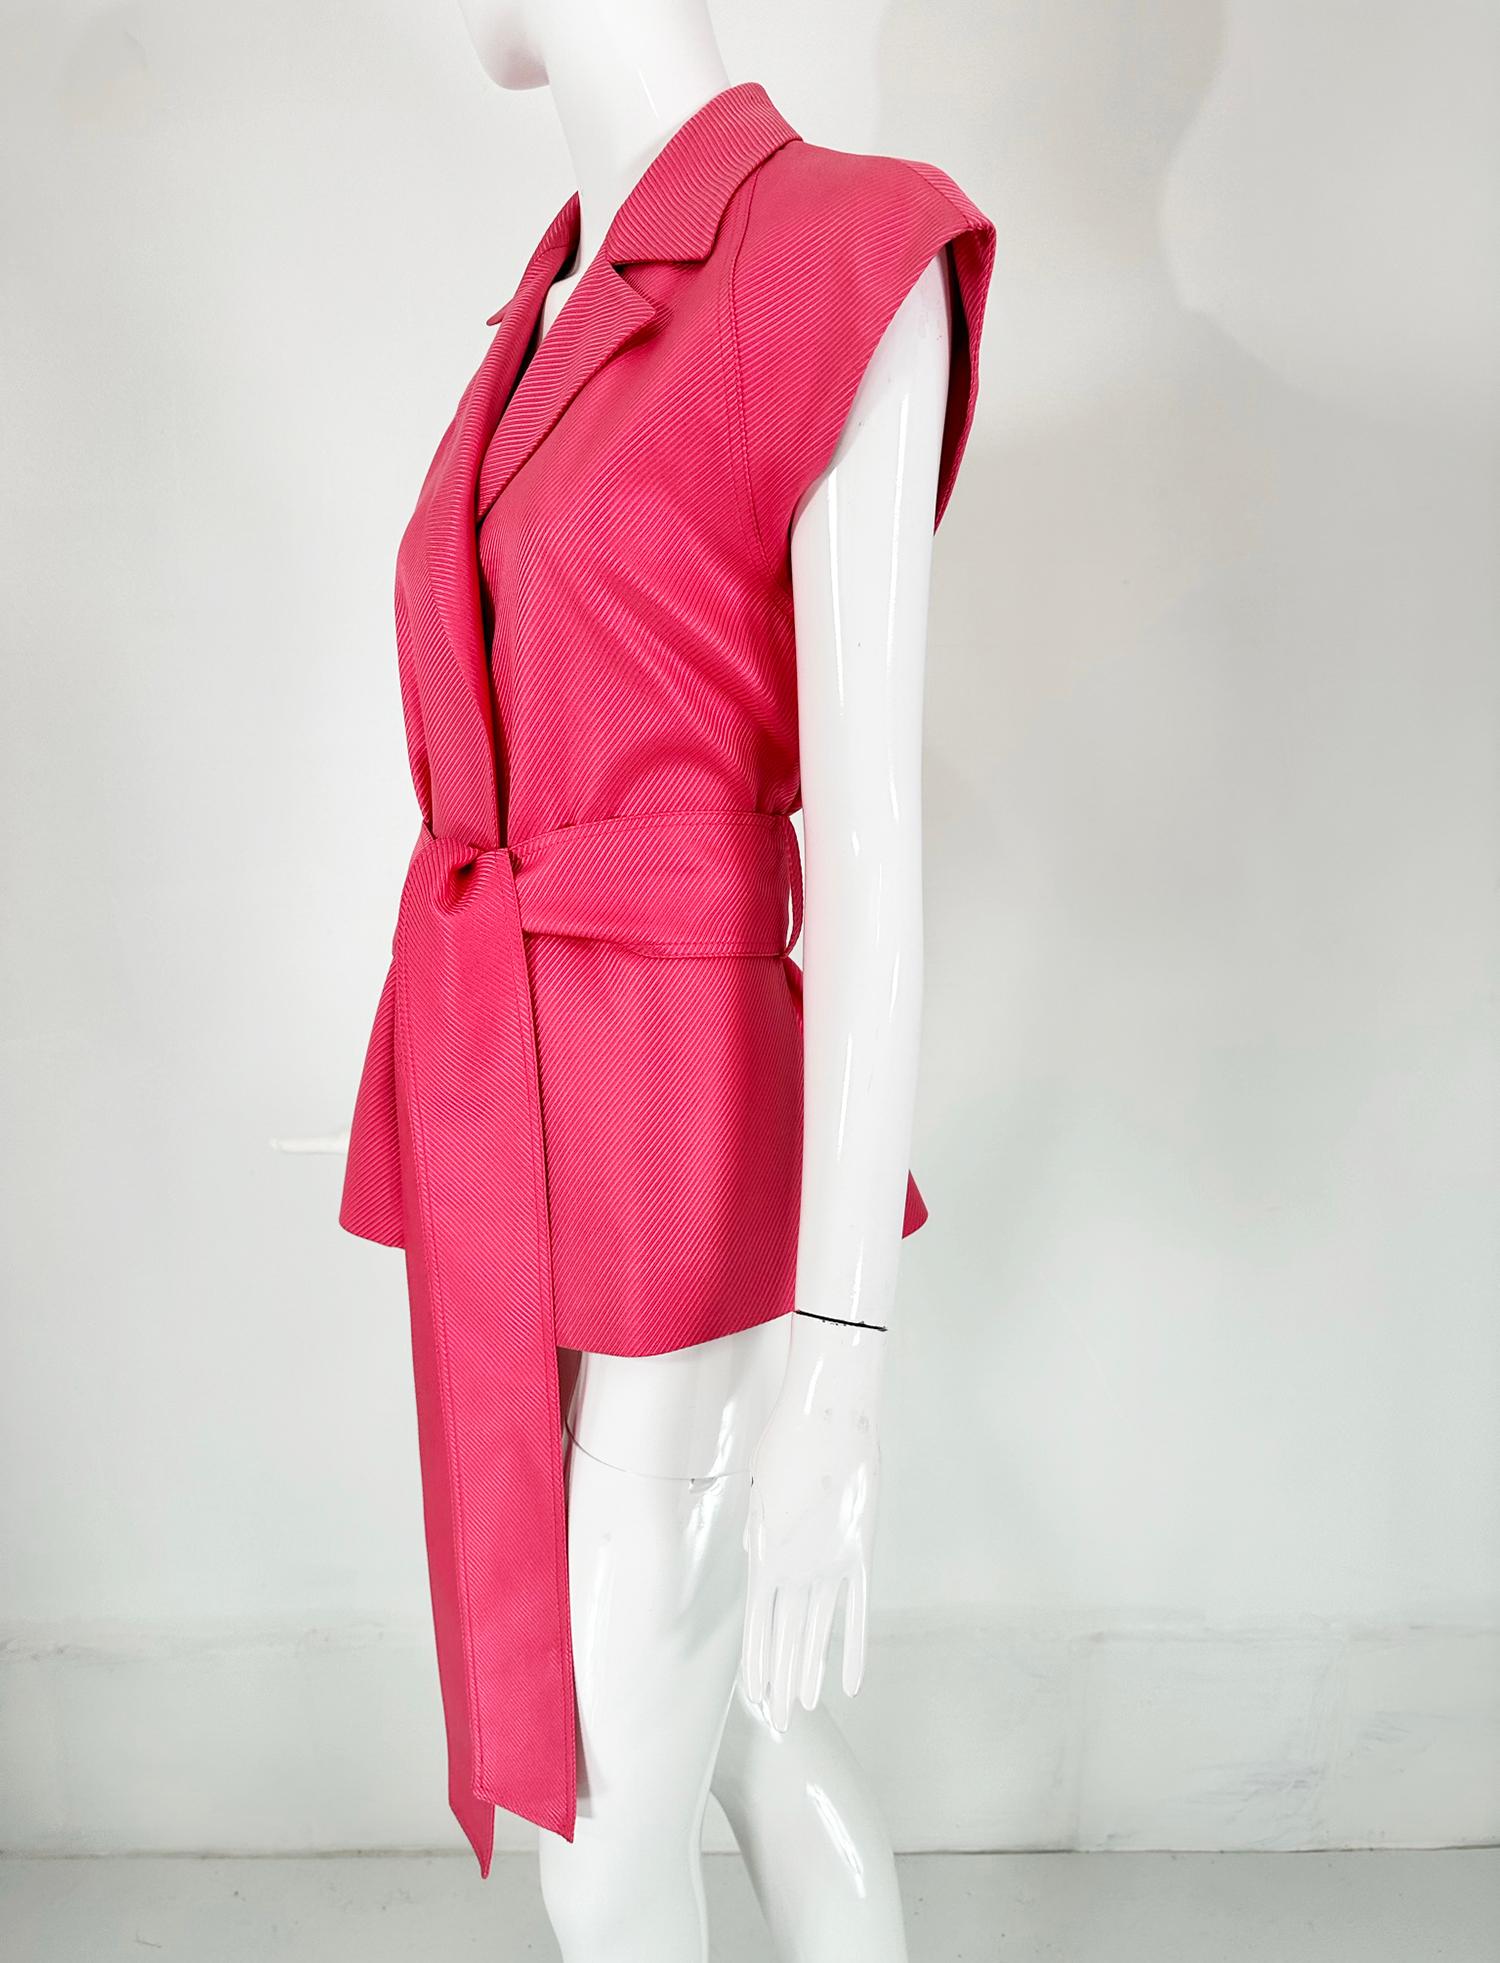 Gianni Versace Couture Pink Silk Twill Cap Sleeve Belted Wrap Jacket 42 4